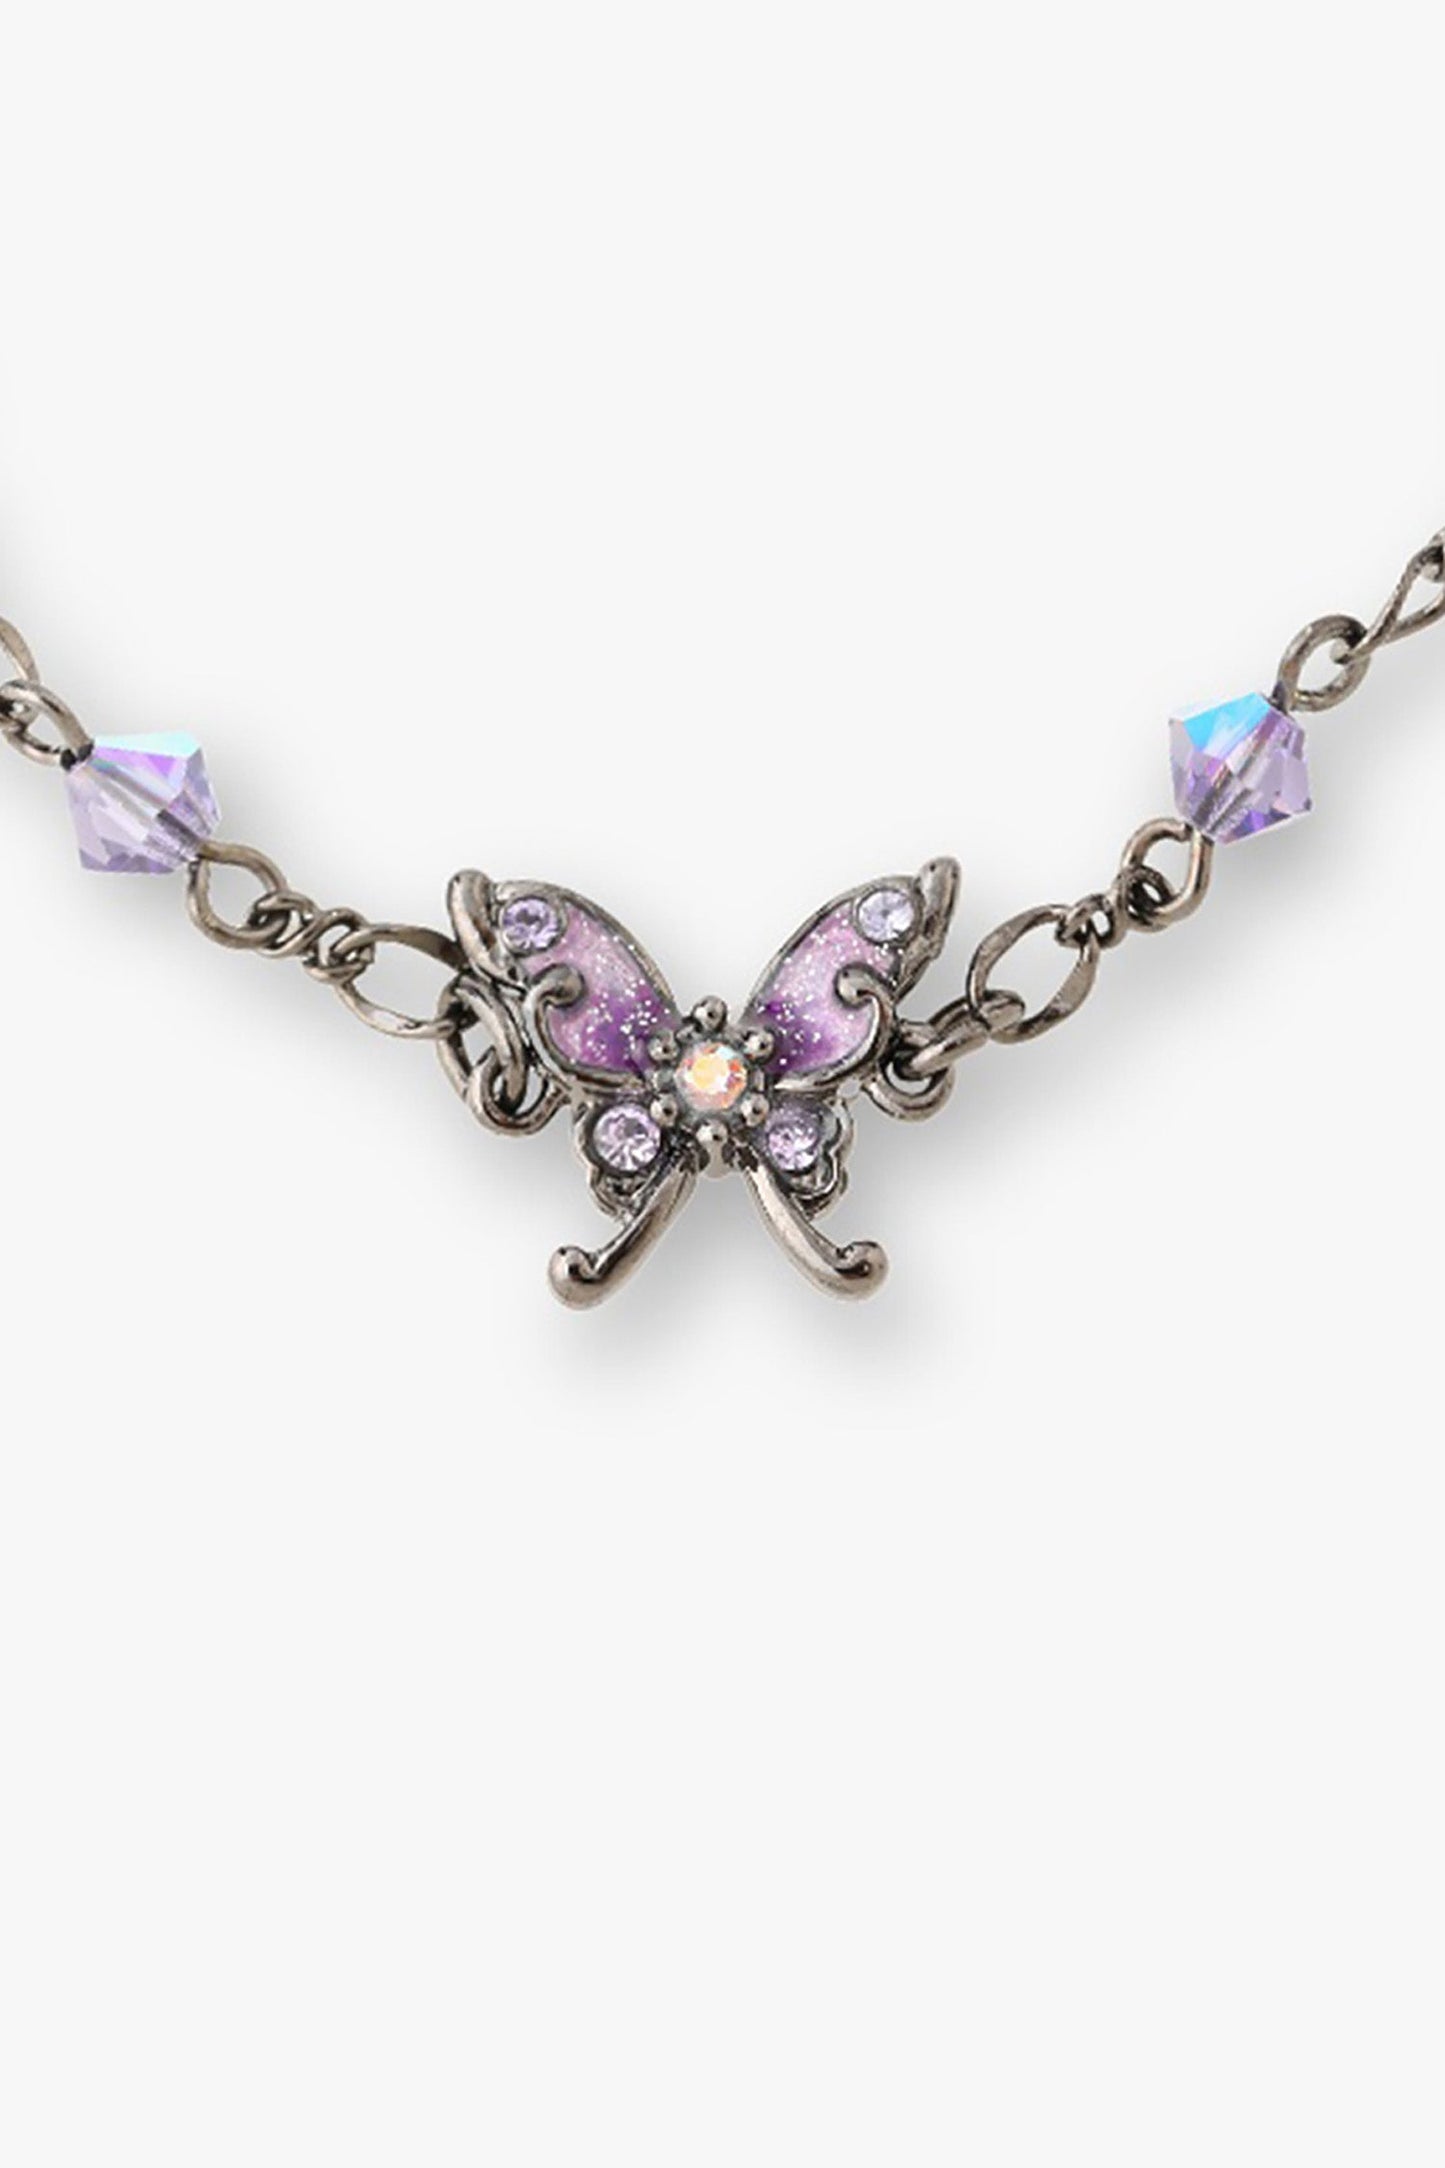 Black Toned Bracelet Embellished with Purple Gems, and a Purple Butterfly Charm, large links